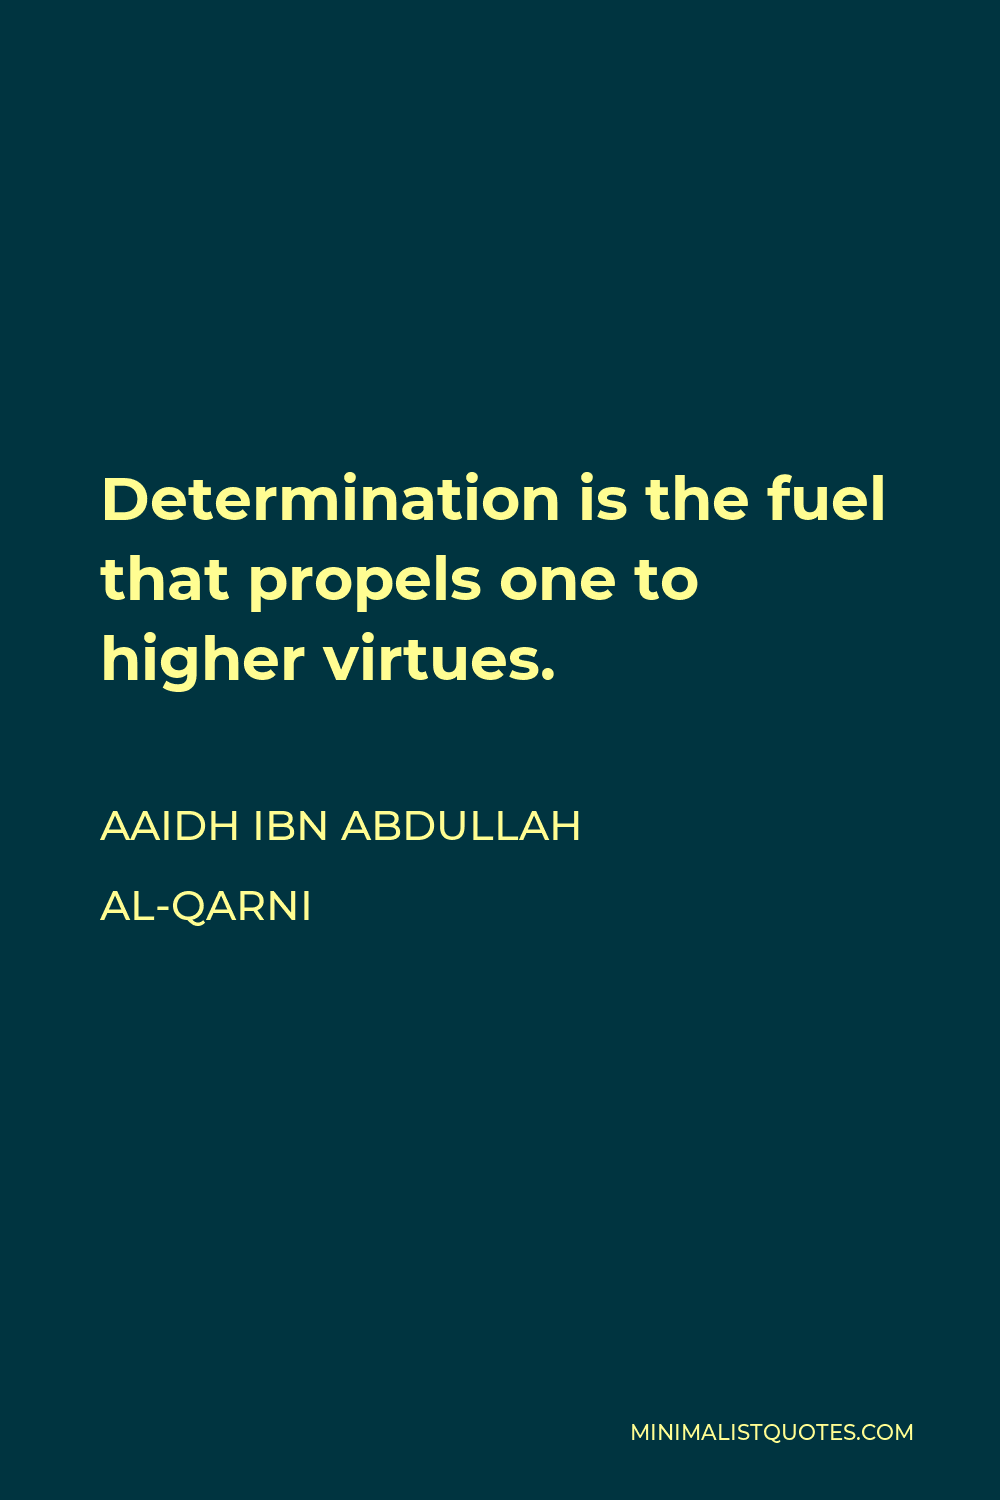 Aaidh ibn Abdullah al-Qarni Quote - Determination is the fuel that propels one to higher virtues.